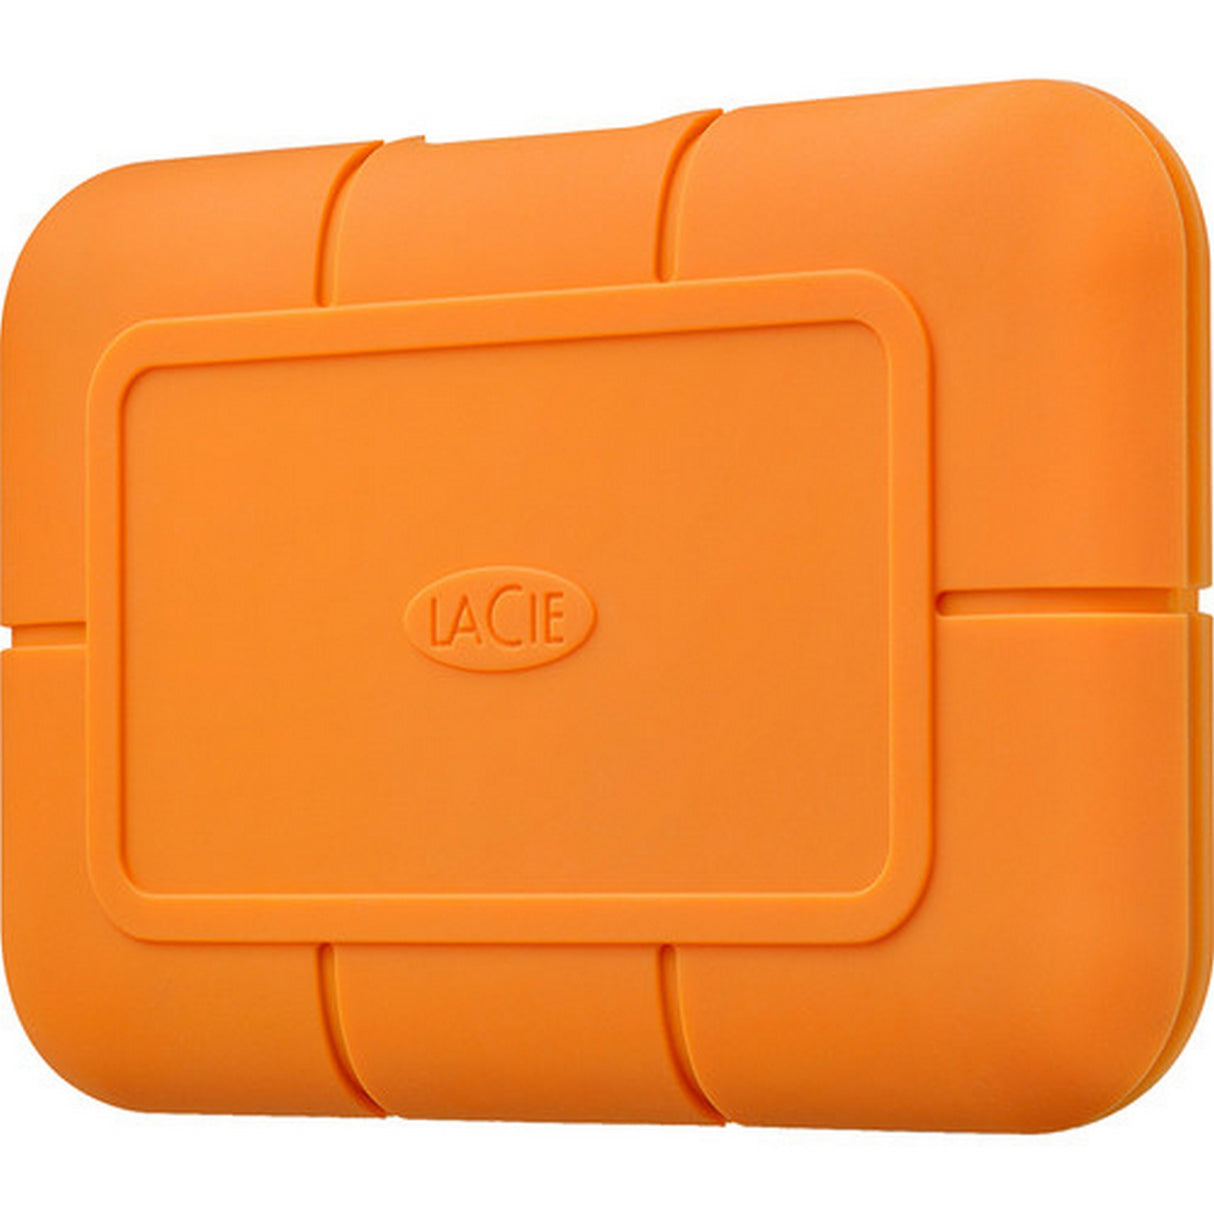 LaCie STHR4000800 Rugged SSD USB-C External Drive with Rescue, 4TB